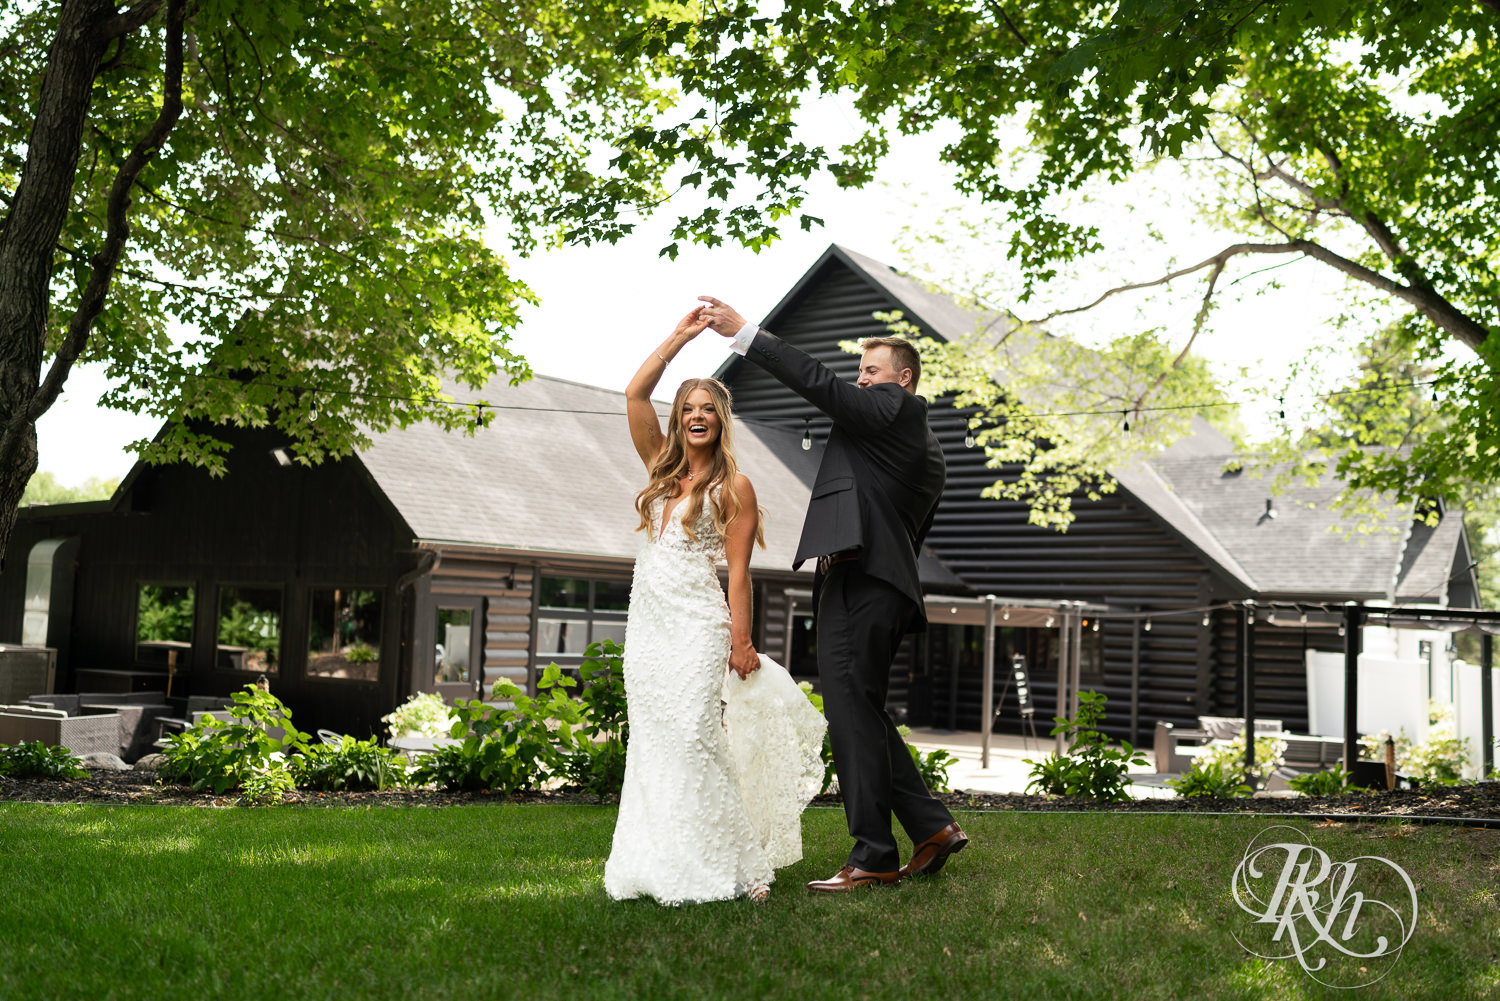 Bride and groom dance in the grass on wedding day at Ahavah Cottage in Elysian, Minnesota.